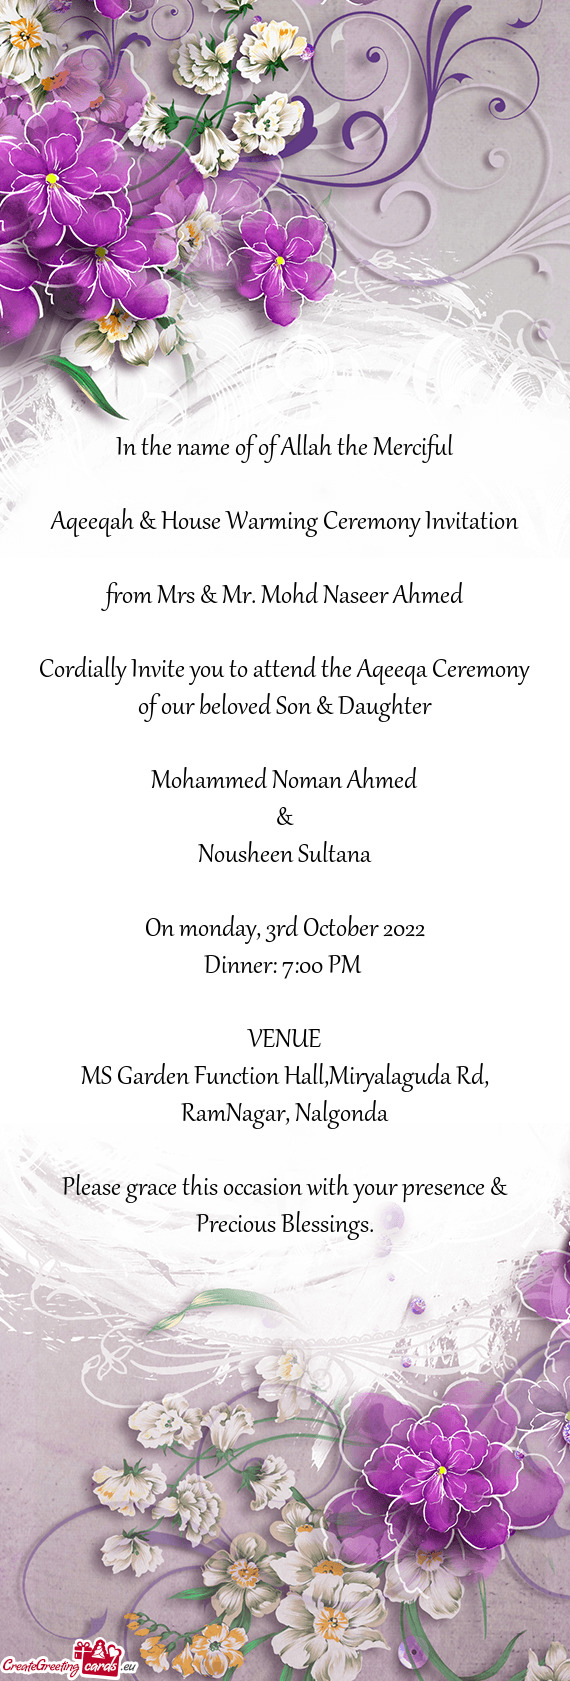 In the name of of Allah the Merciful Aqeeqah & House Warming Ceremony Invitation from Mrs & Mr